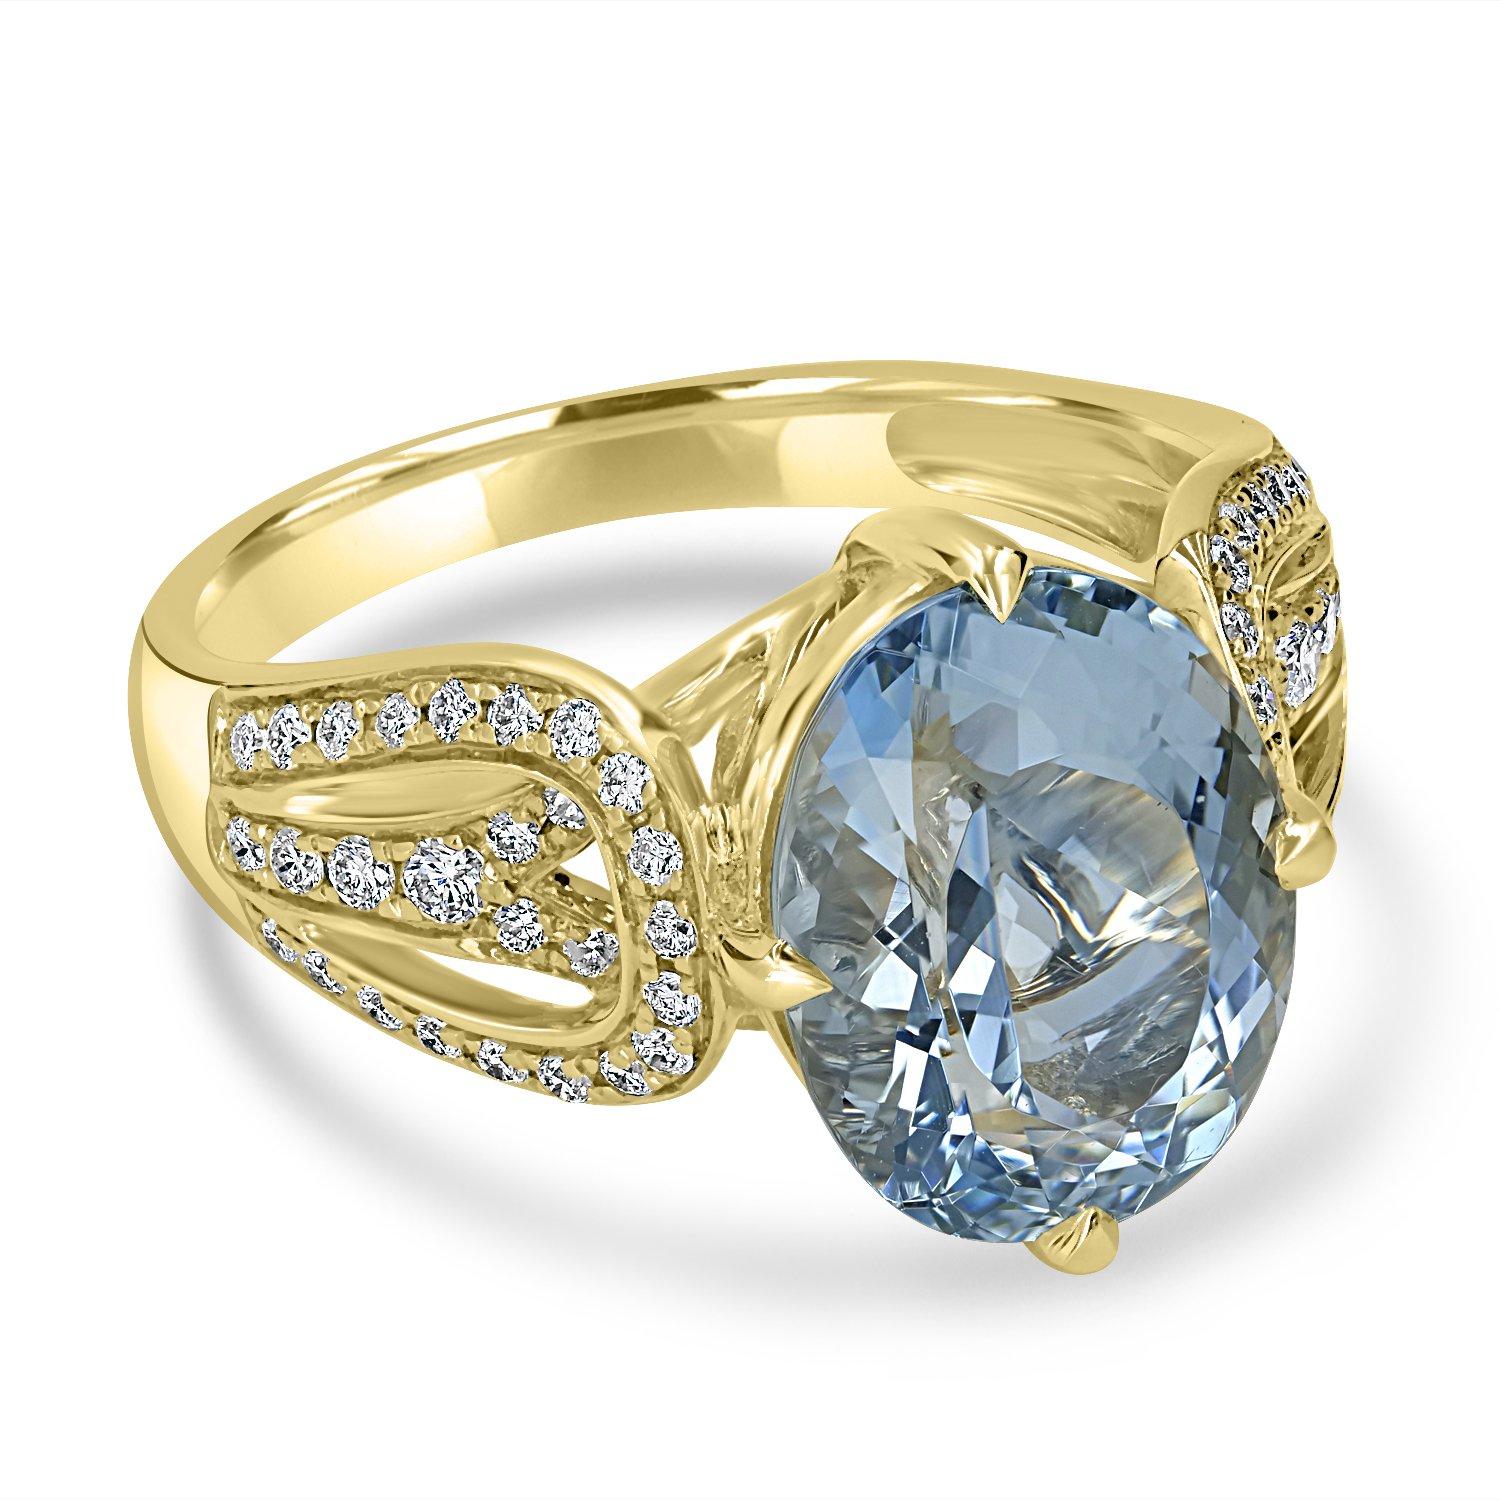 4.02ct Aquamarine Ring with 0.3Tct Diamonds Set in 14K Yellow Gold In New Condition For Sale In New York, NY